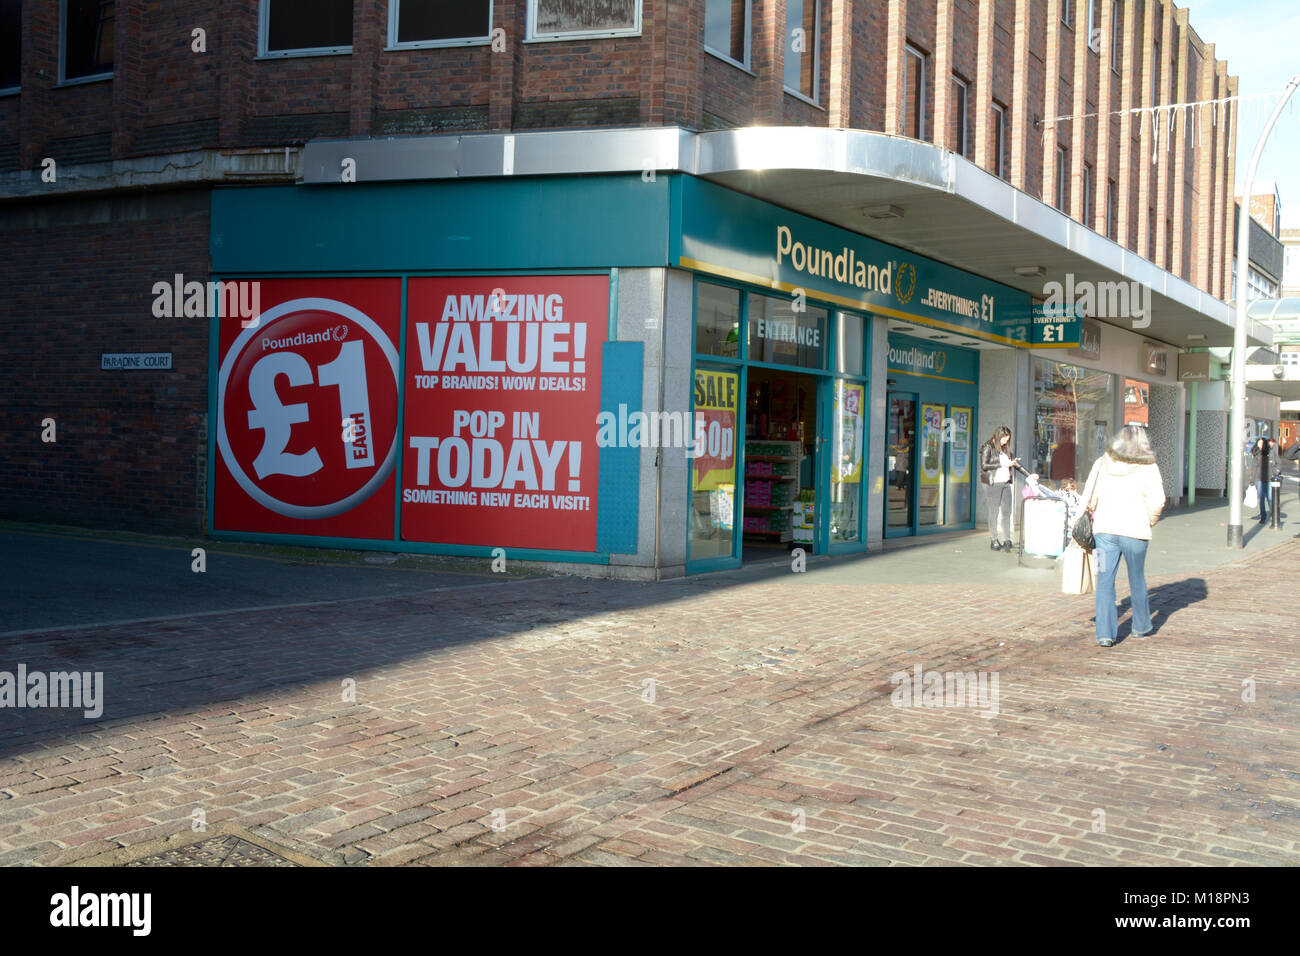 Poundland Shop in Bedford town centre in Bedfordshire England Stock Photo